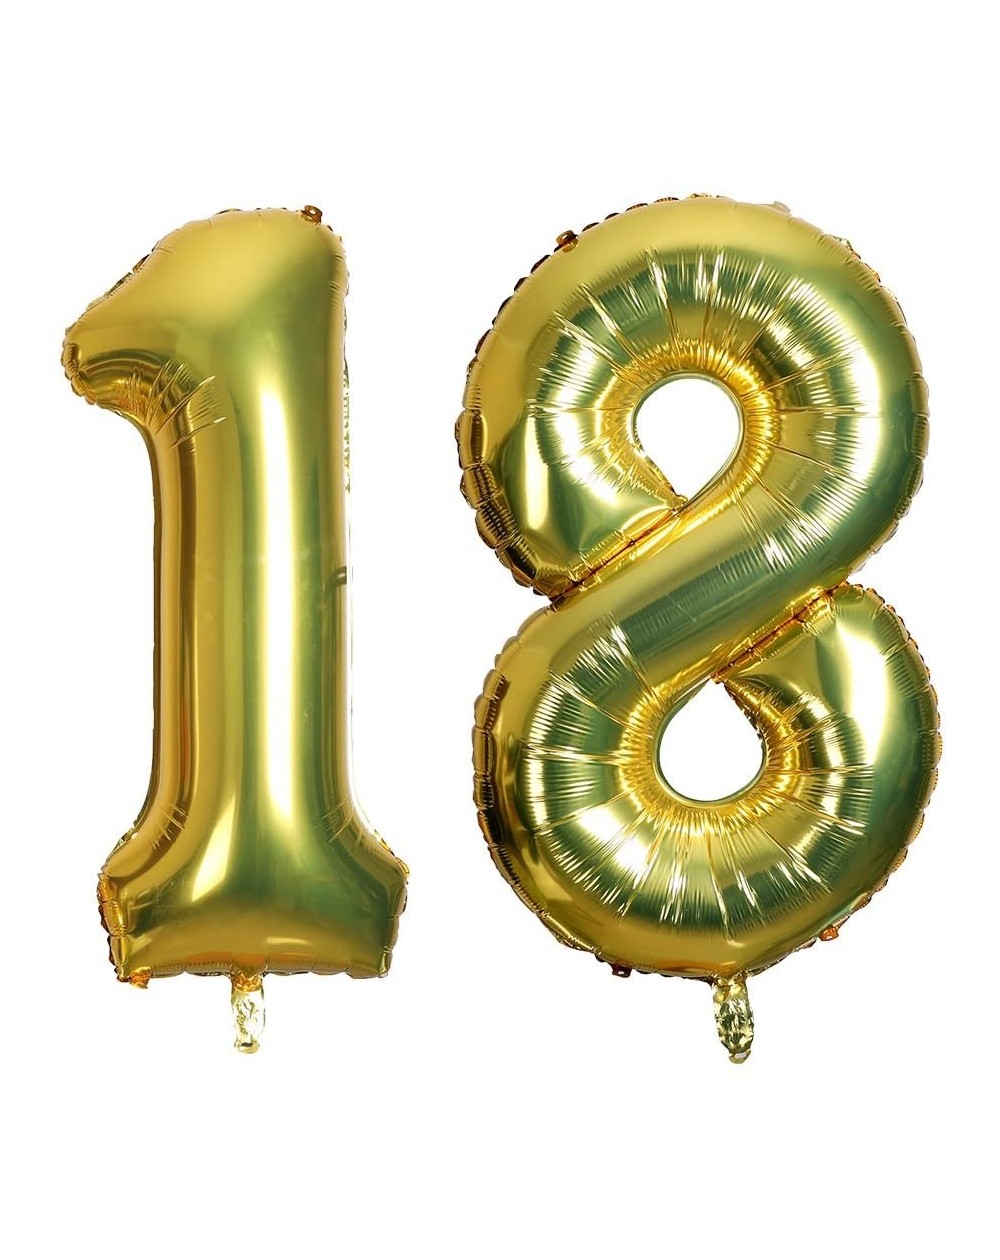 Balloons 40 Inch Jumbo Number 18 Balloon Birthday Party Celebration Decoration Foil Helium Balloons-Gold - 18 Gold - C718S52Q...